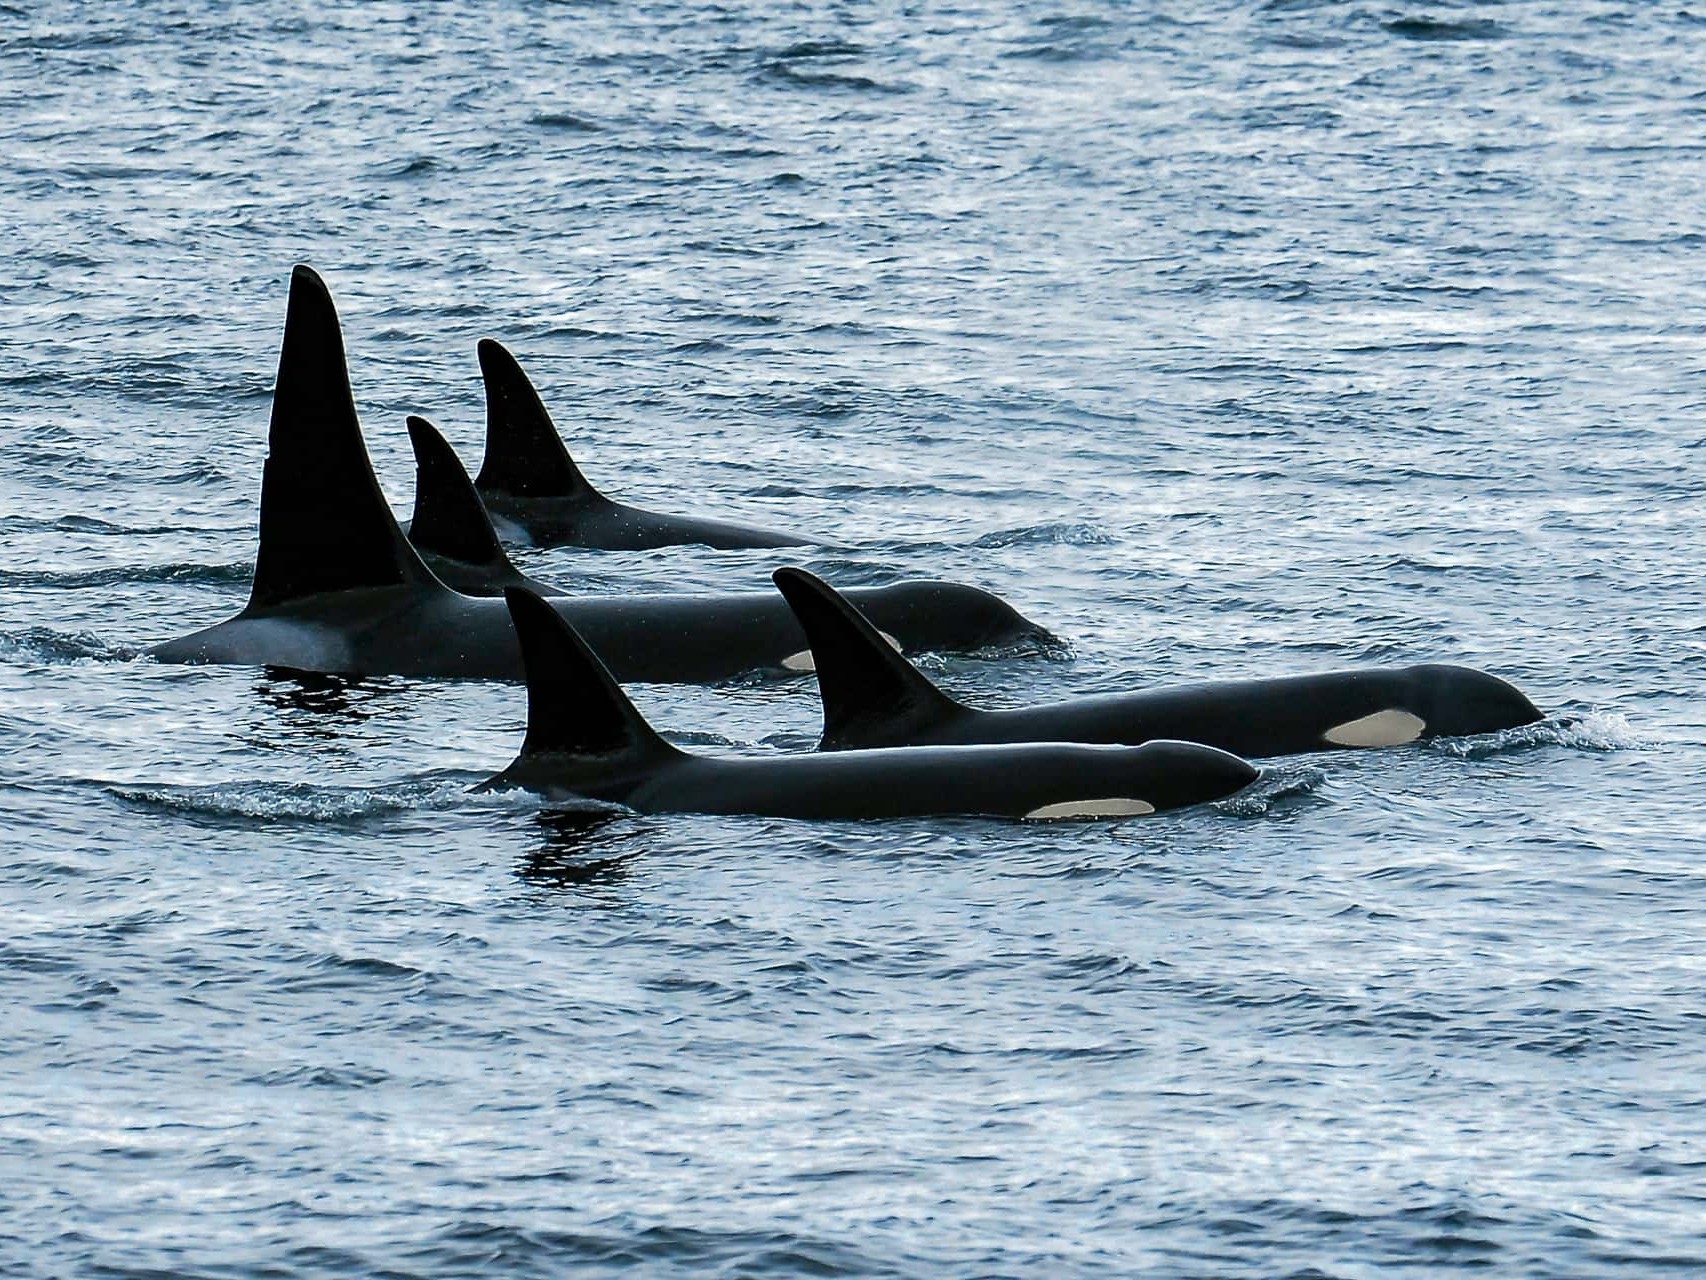 5 transient or biggs killer whales traveling close together.